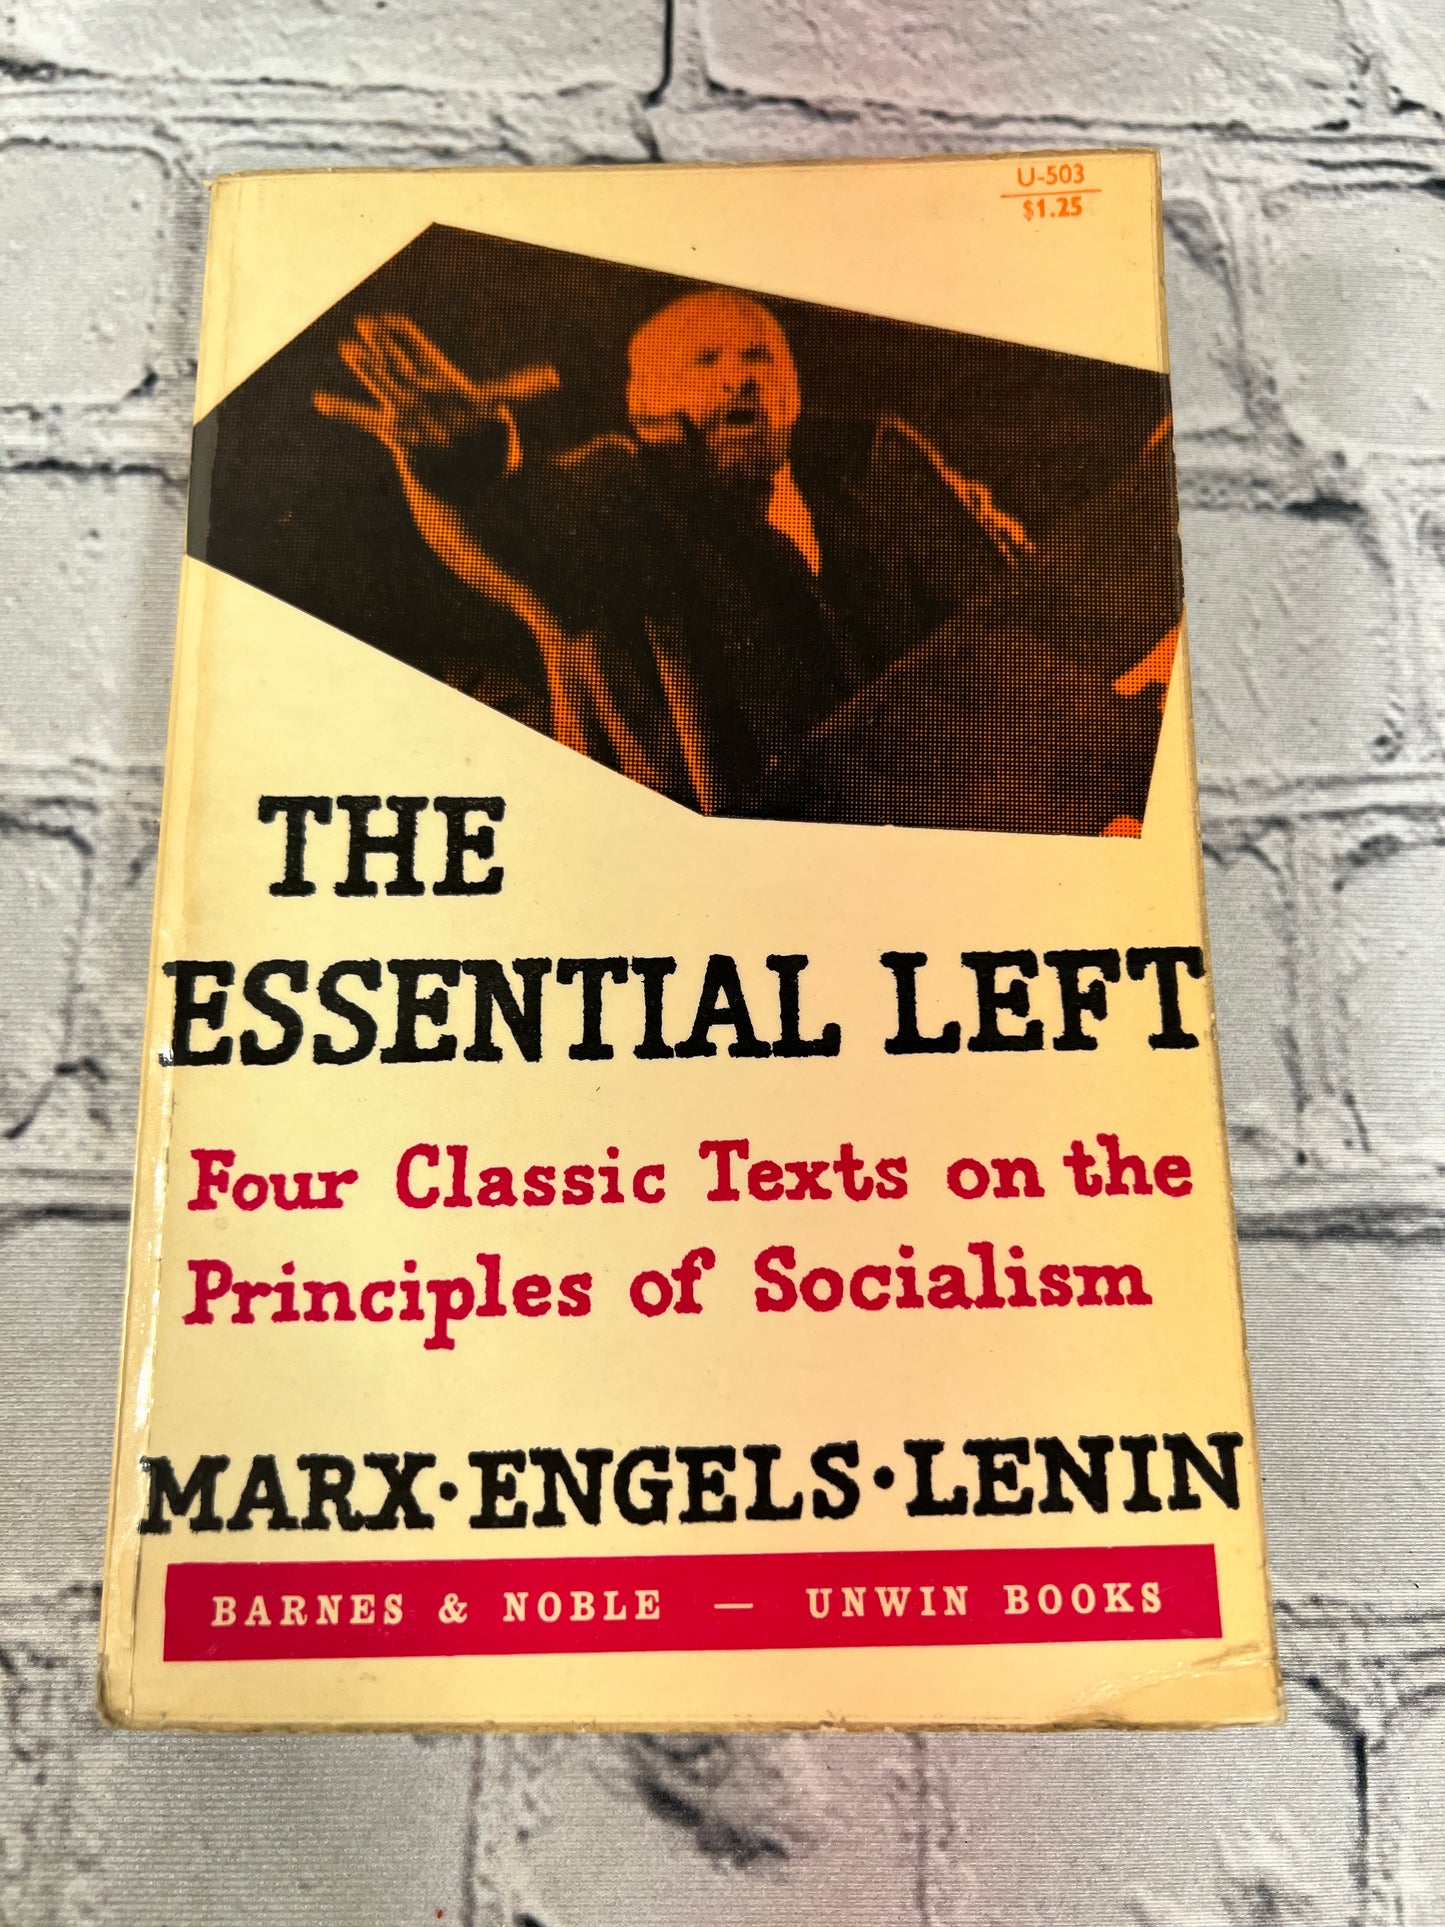 The Essential Left Four Classic Texts on the Principles of Socialism [1961]